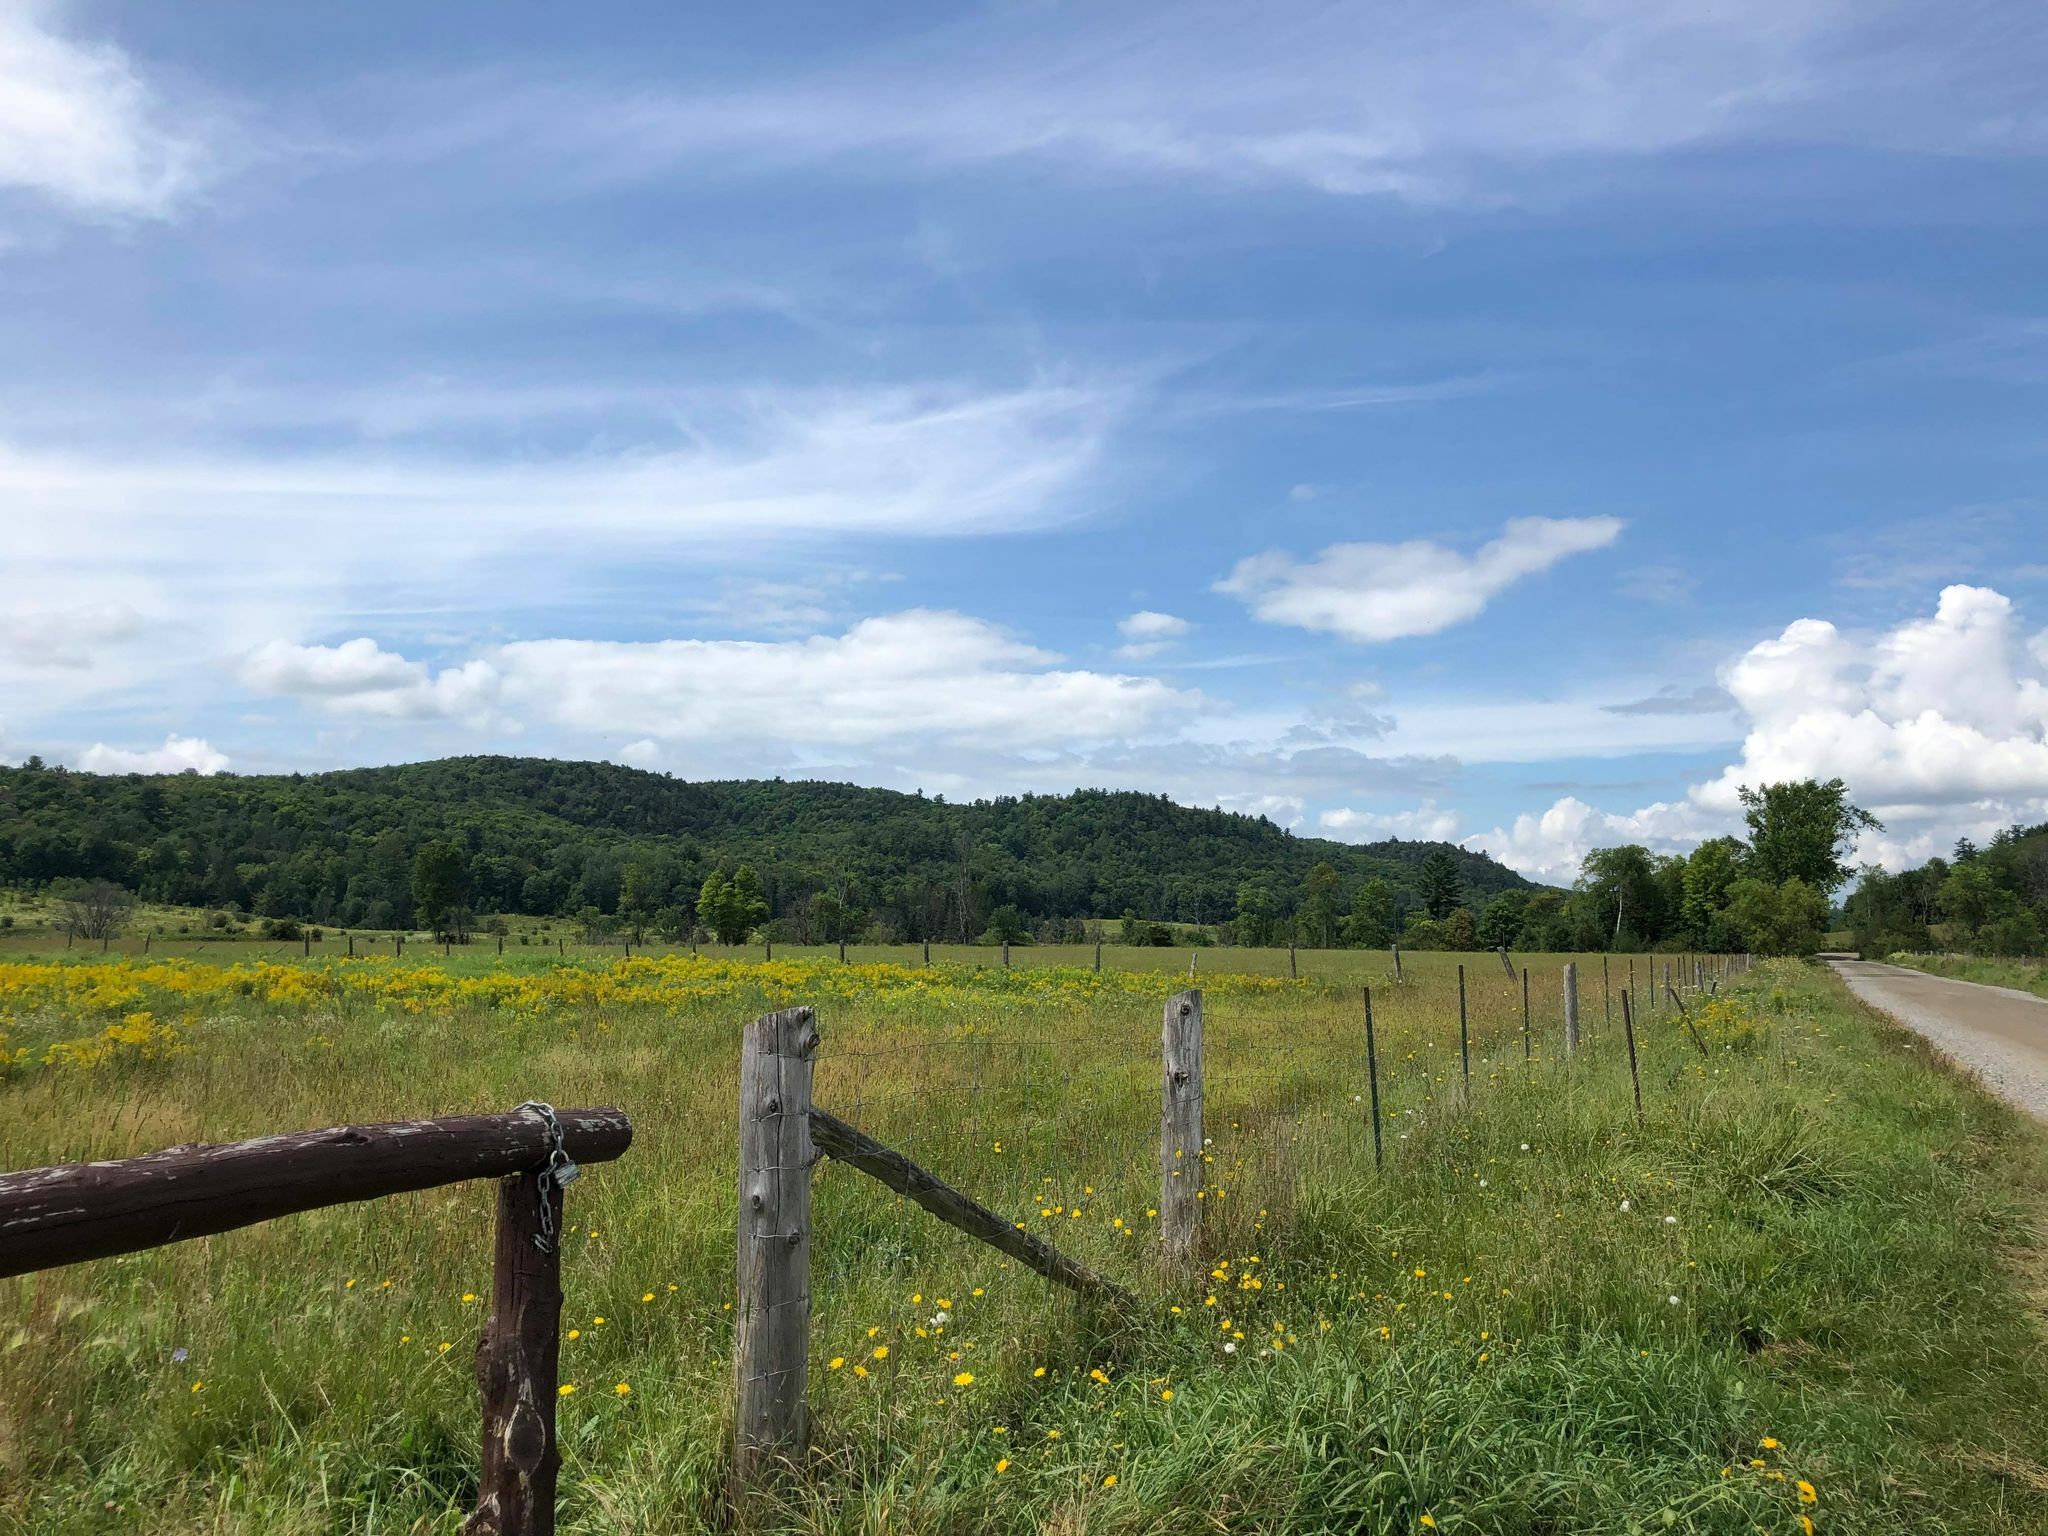 Fence at Meech Creek Valley